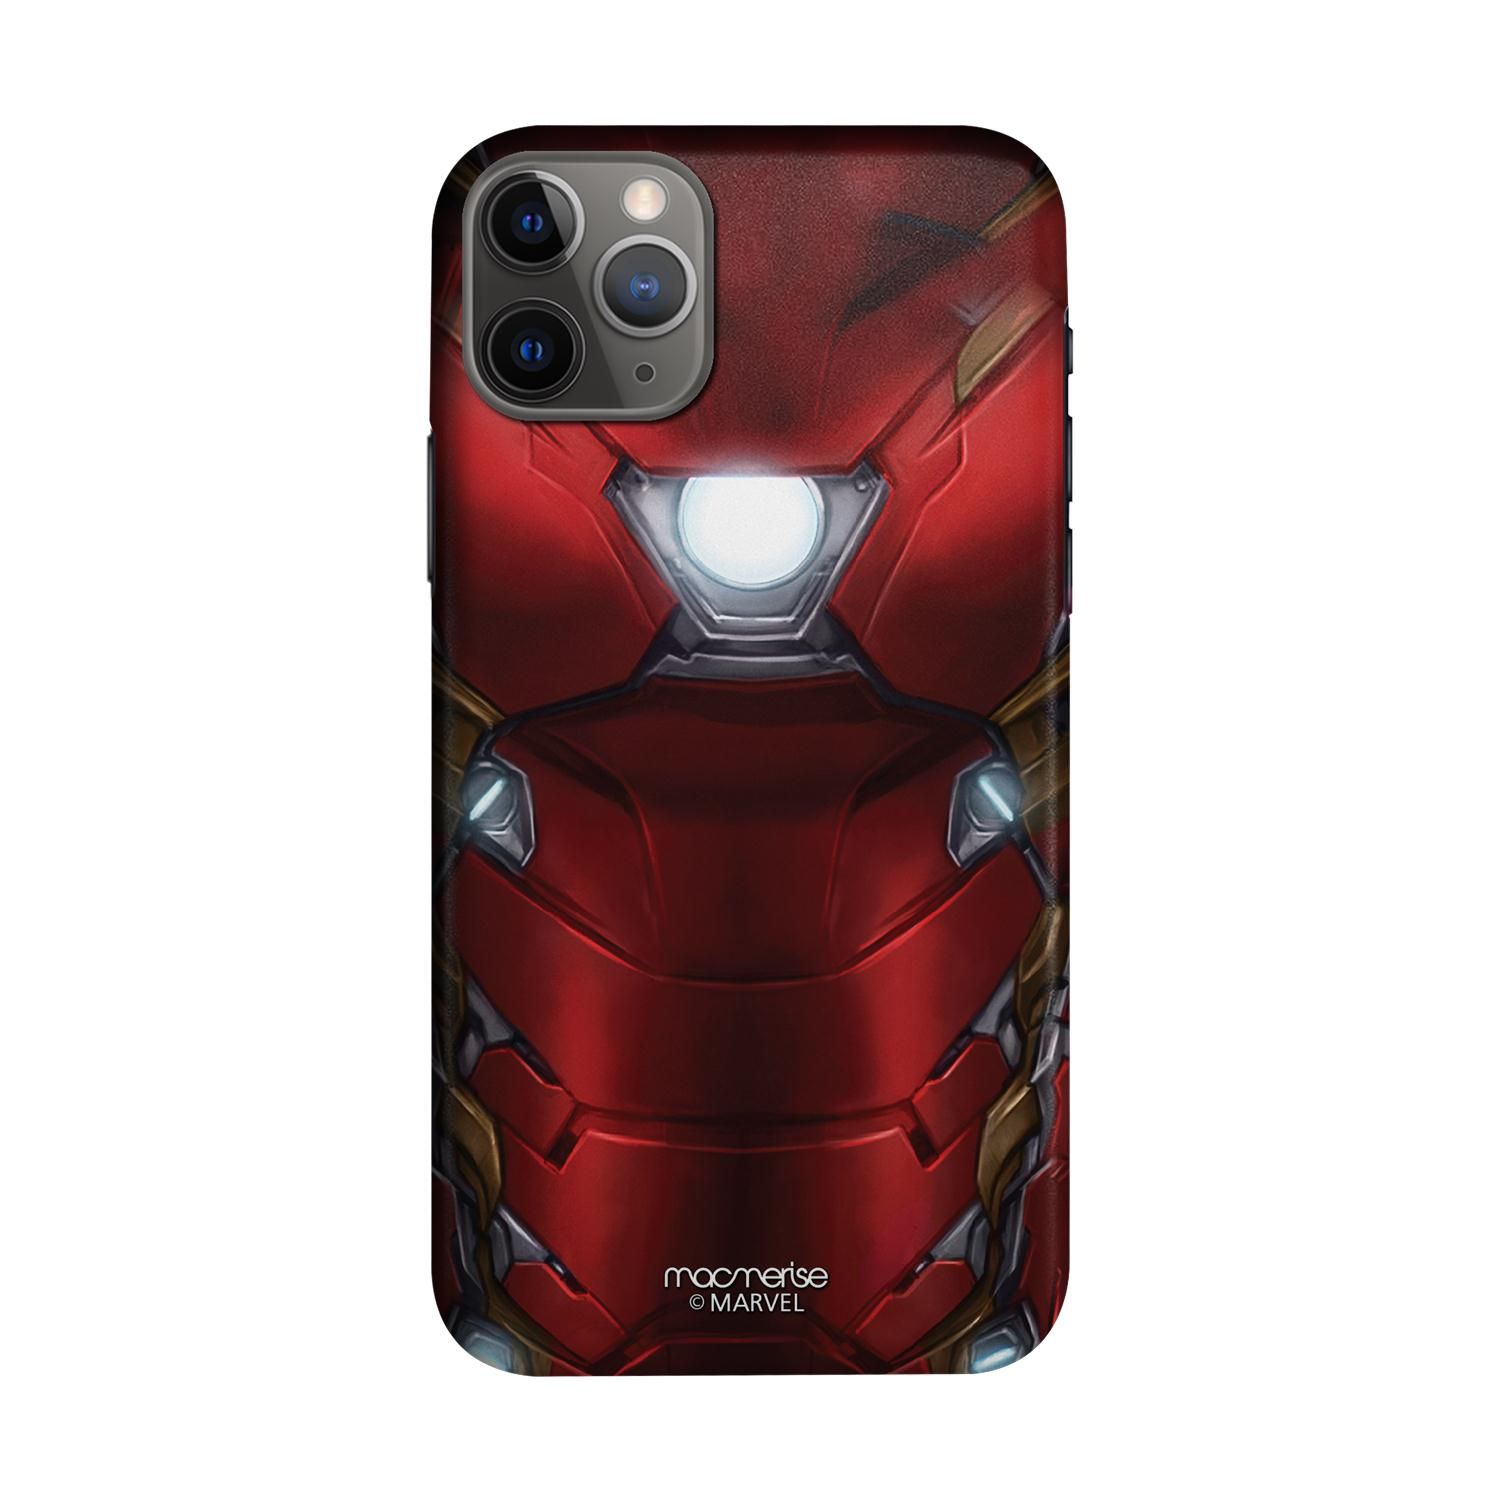 Buy Suit up Ironman - Sleek Phone Case for iPhone 11 Pro Max Online